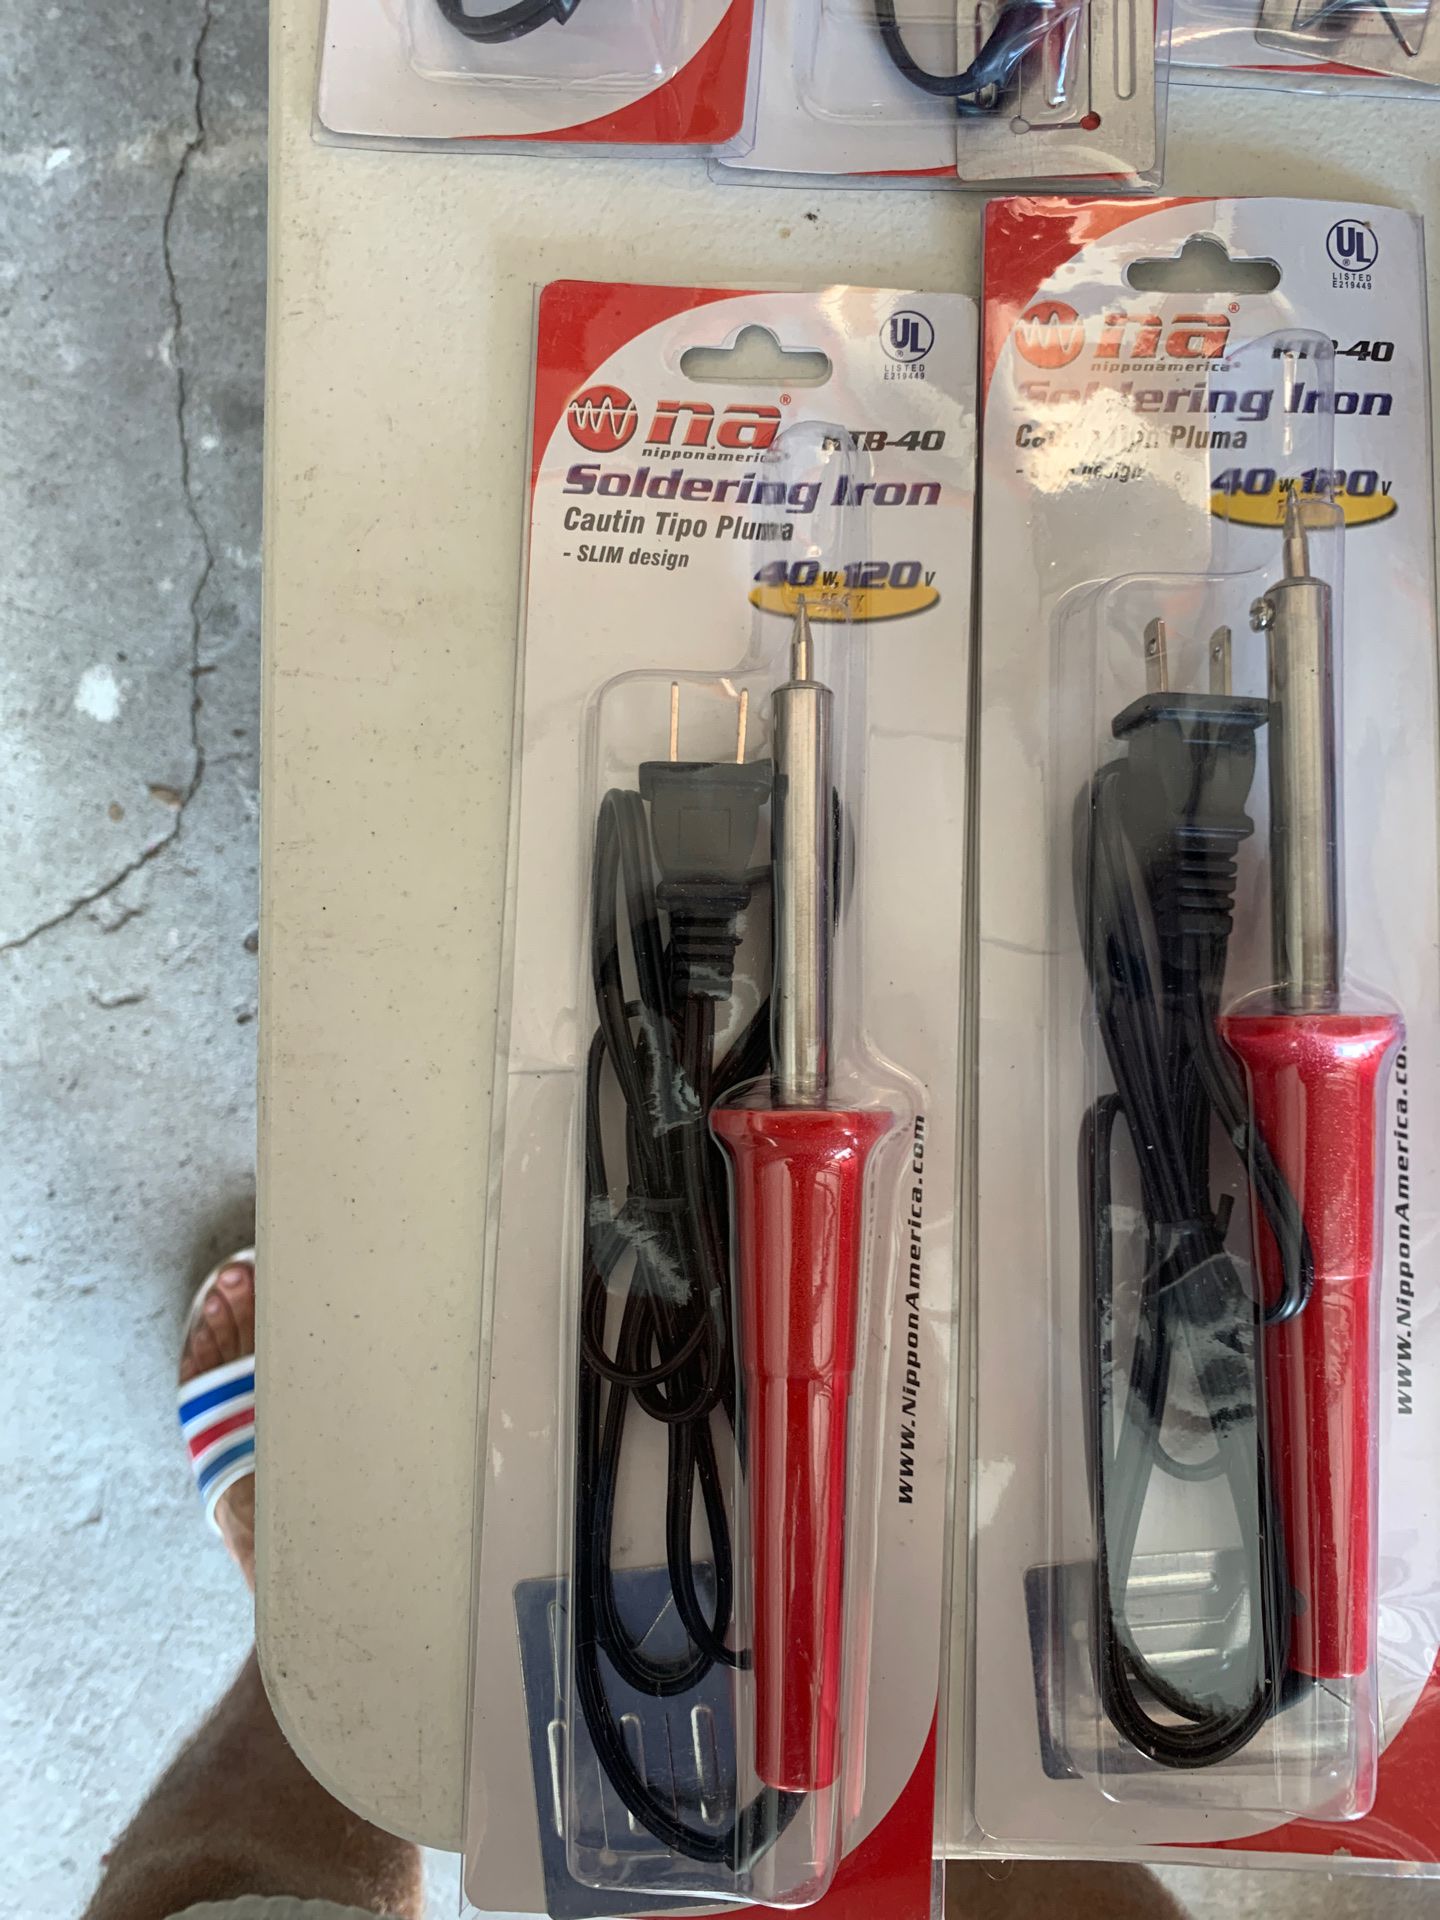 Soldering Iron 40w120v Brand New 10$ I have 35 of them